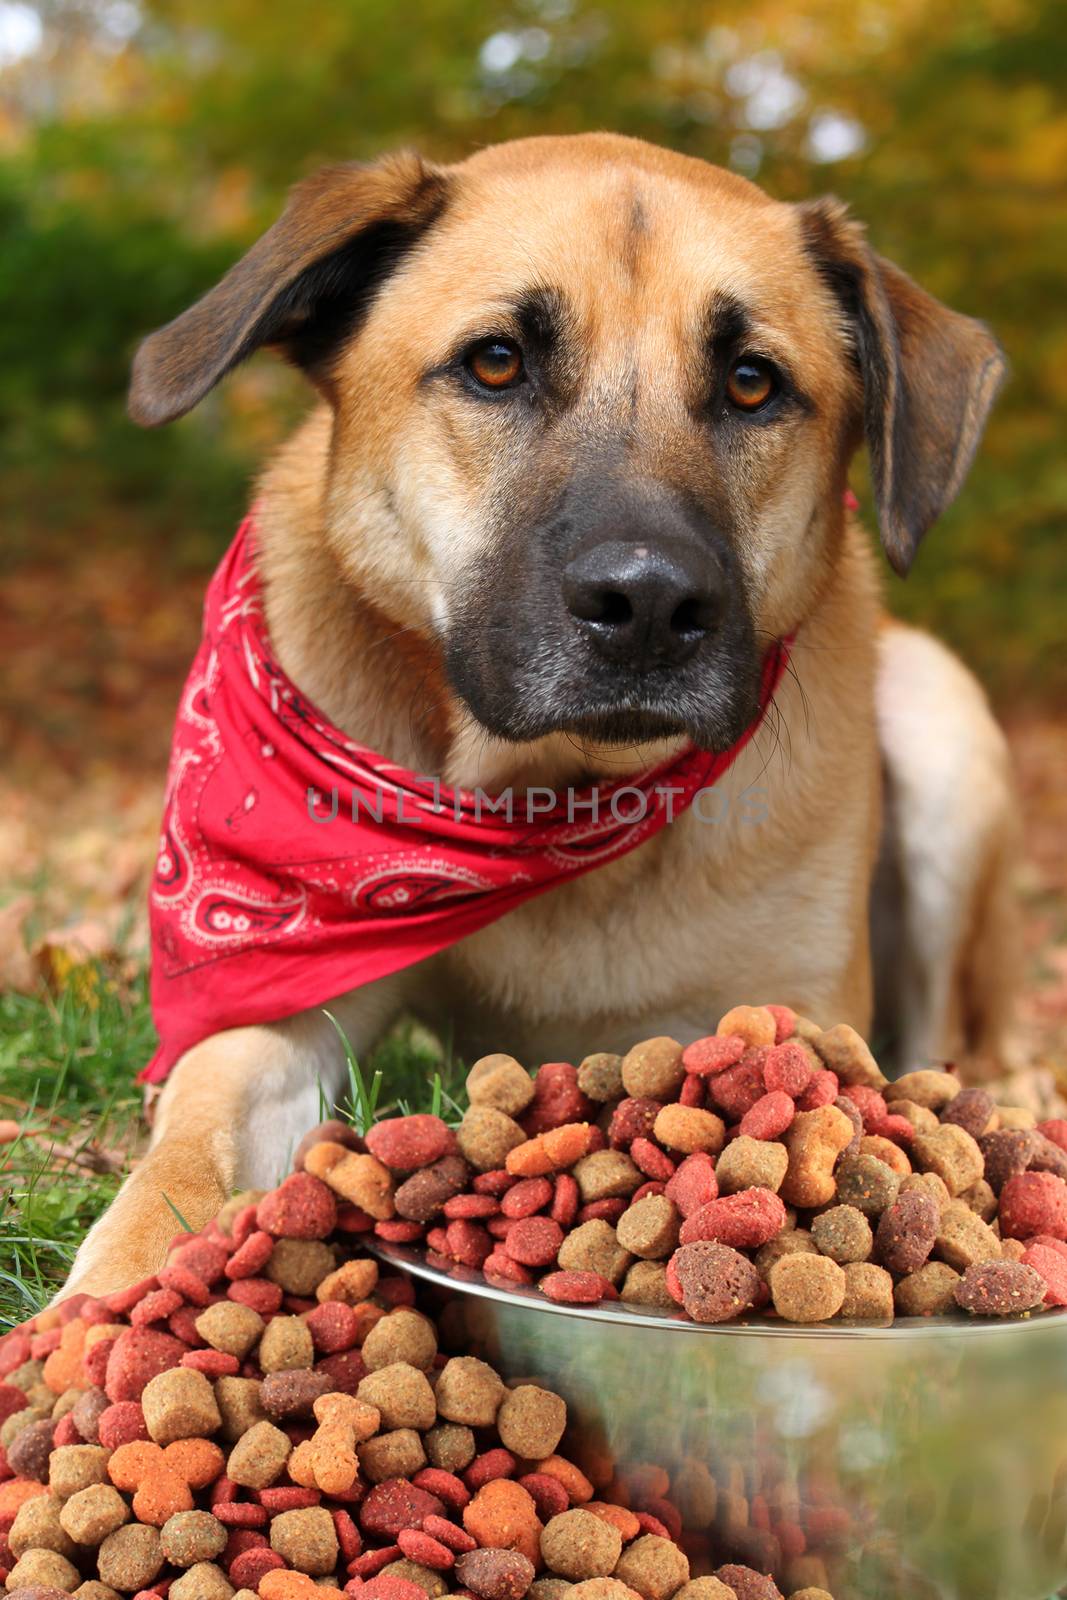 Large mixed breed dog with food in Autumn by gvictoria